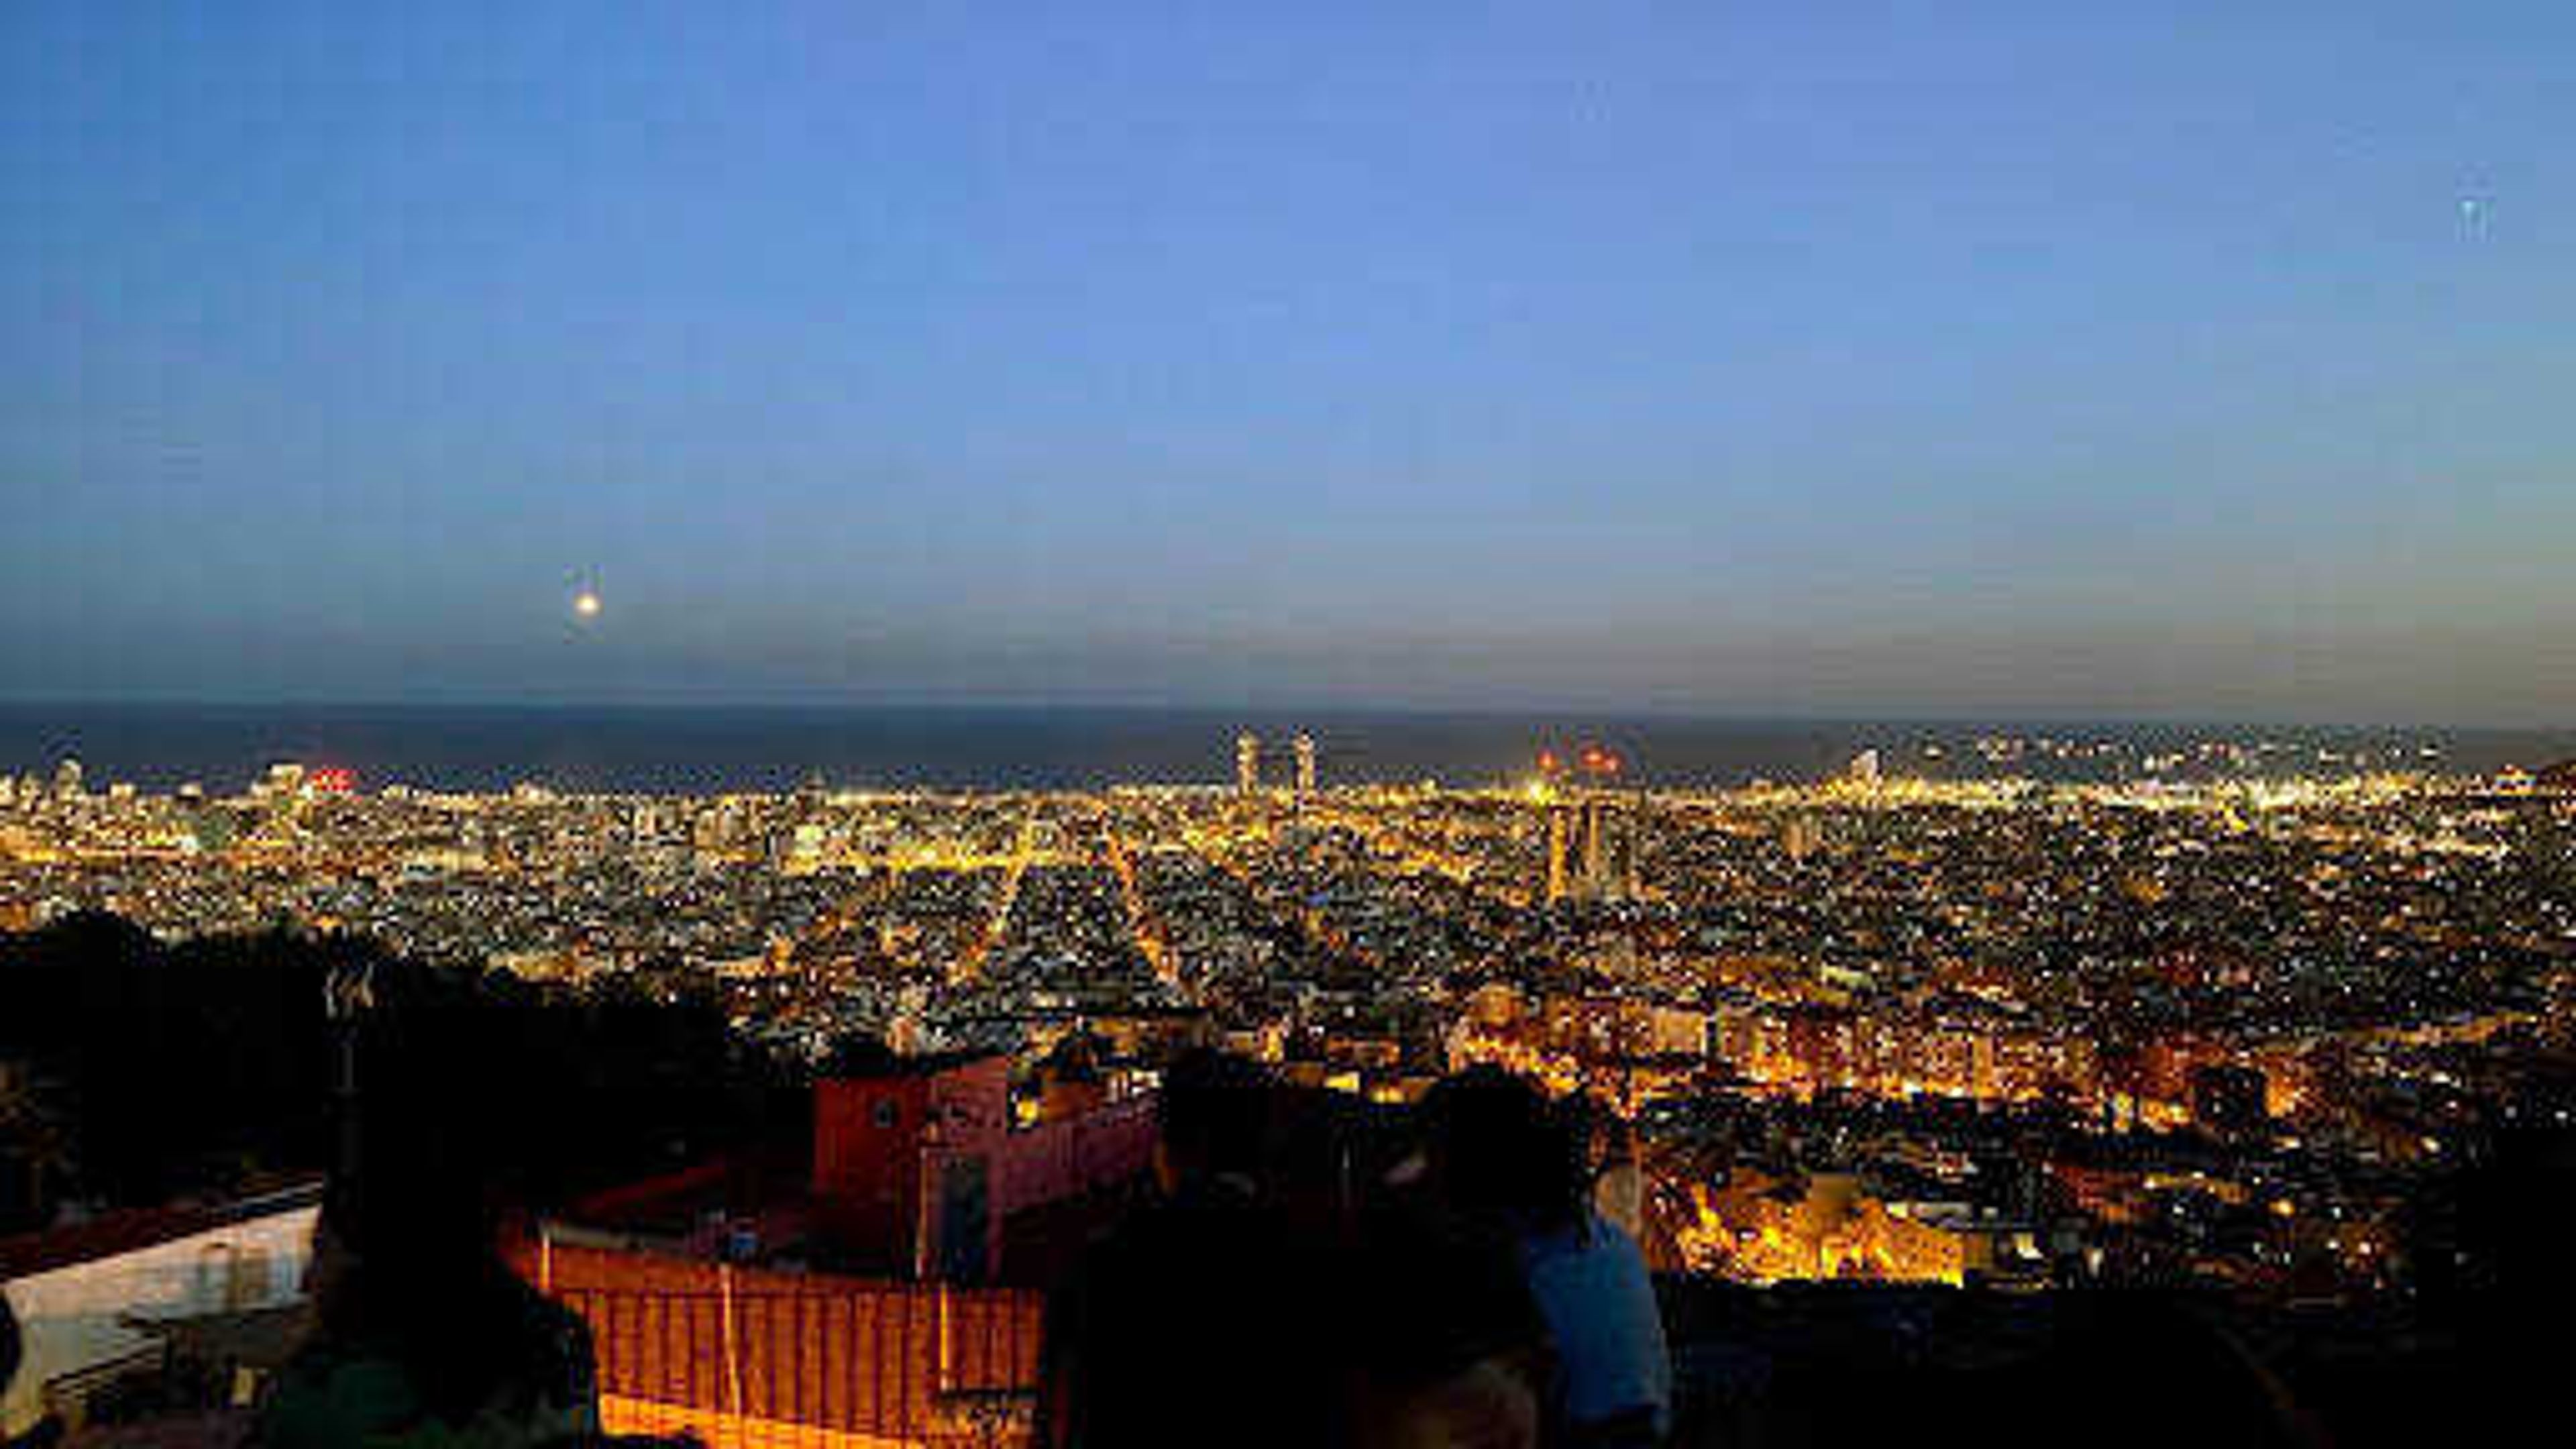 The view of Barcelona from the top of El Carmel mountain right after sunset.
